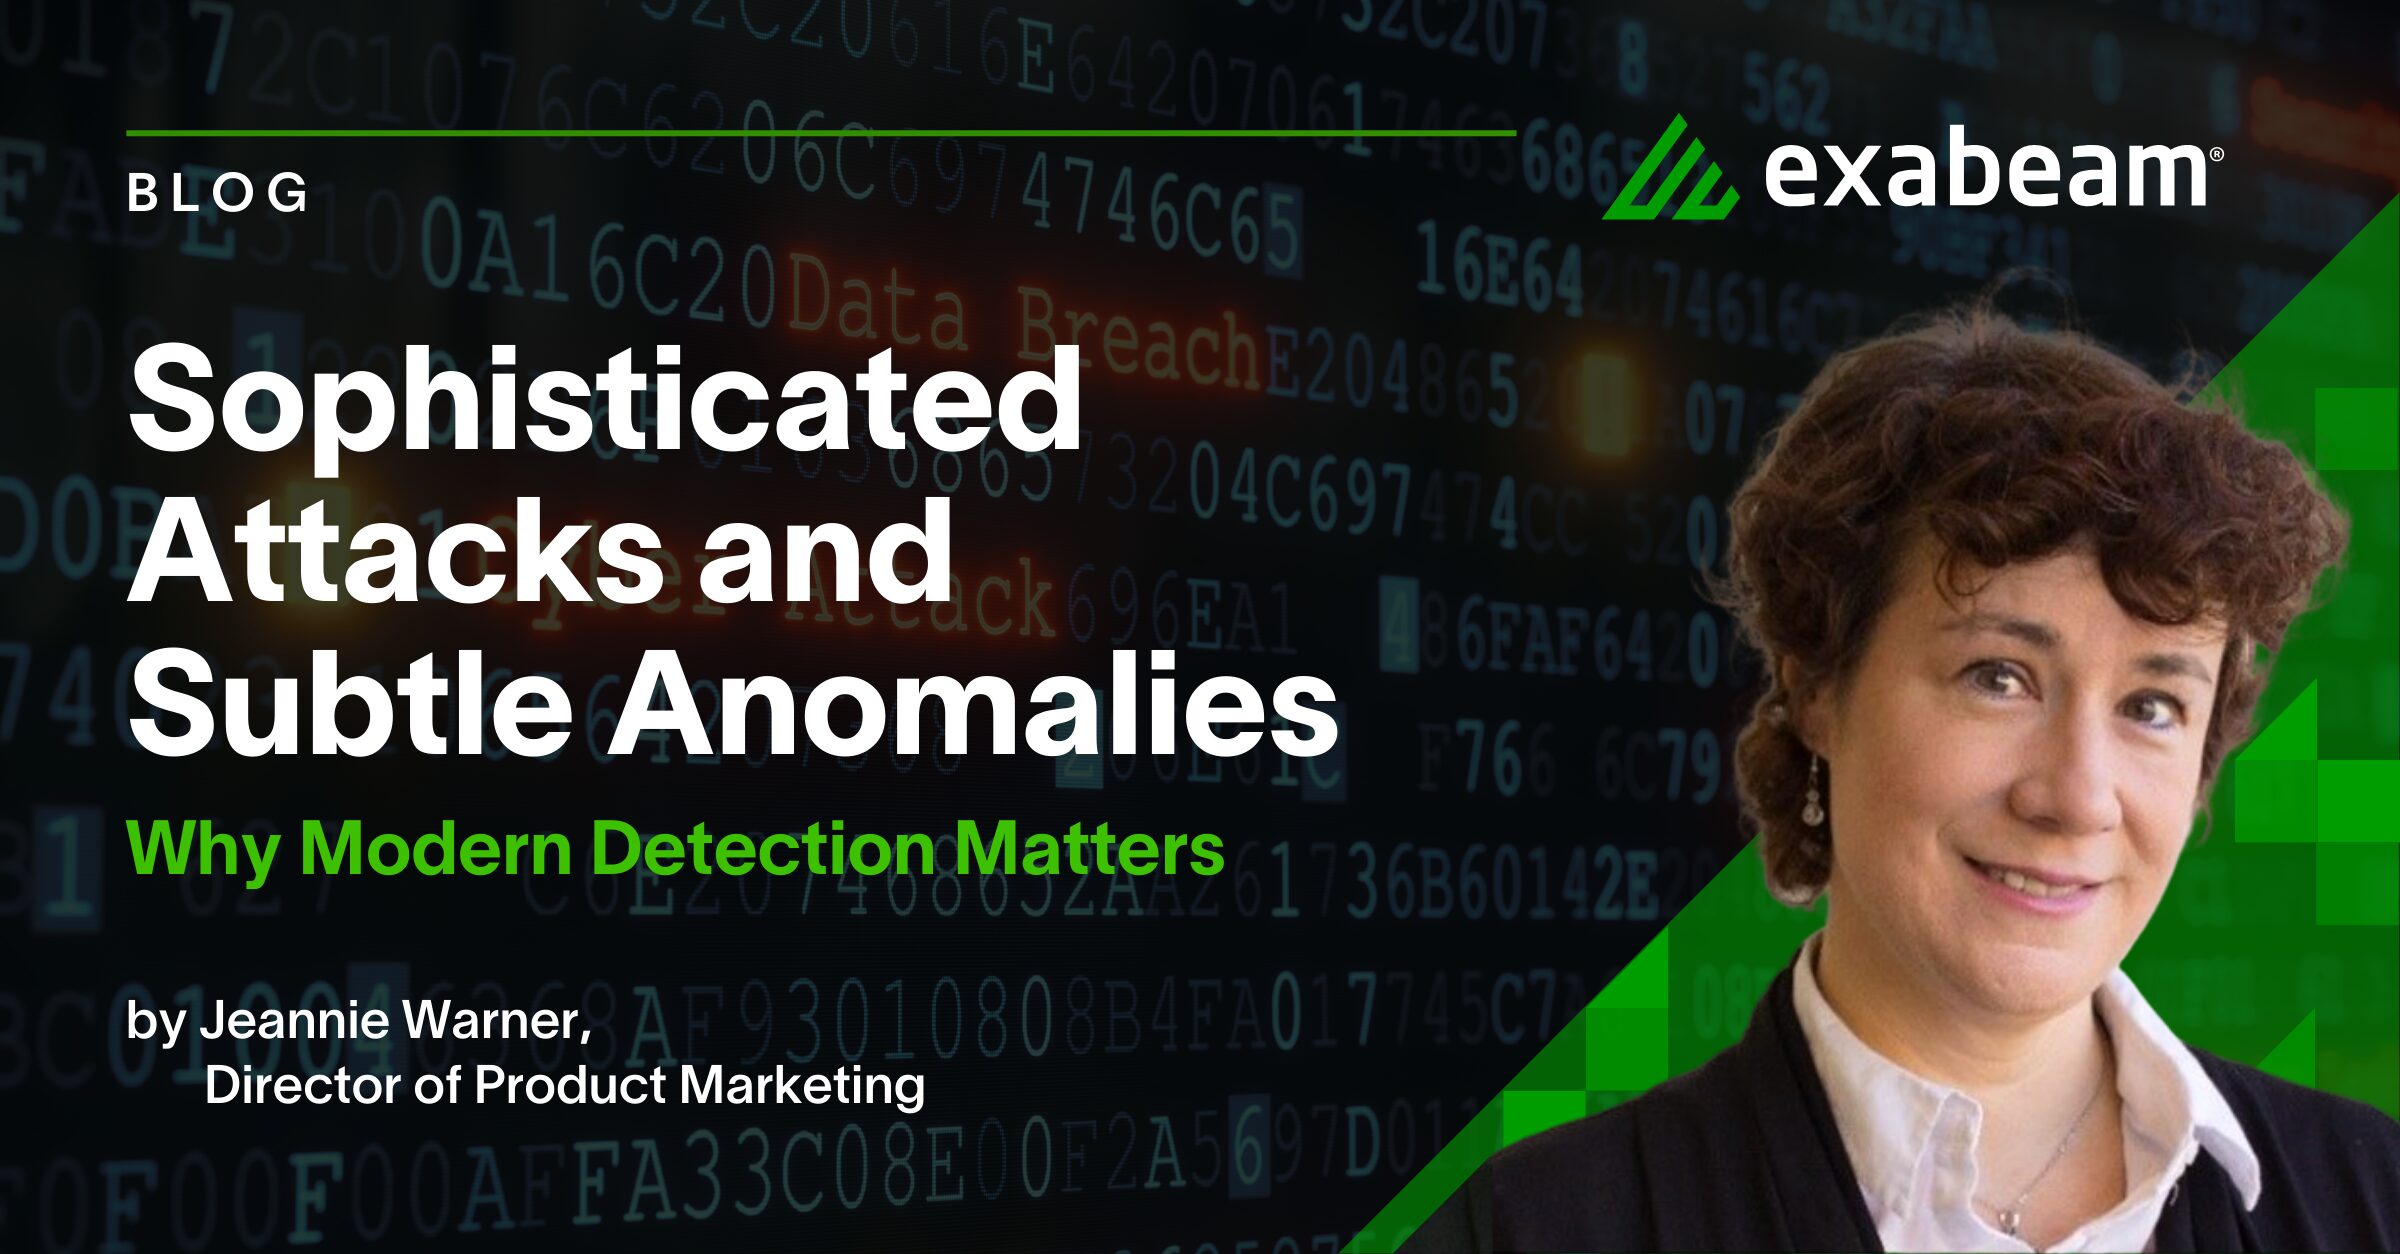 Sophisticated Attacks and Subtle Anomalies: Why Modern Detection Matters